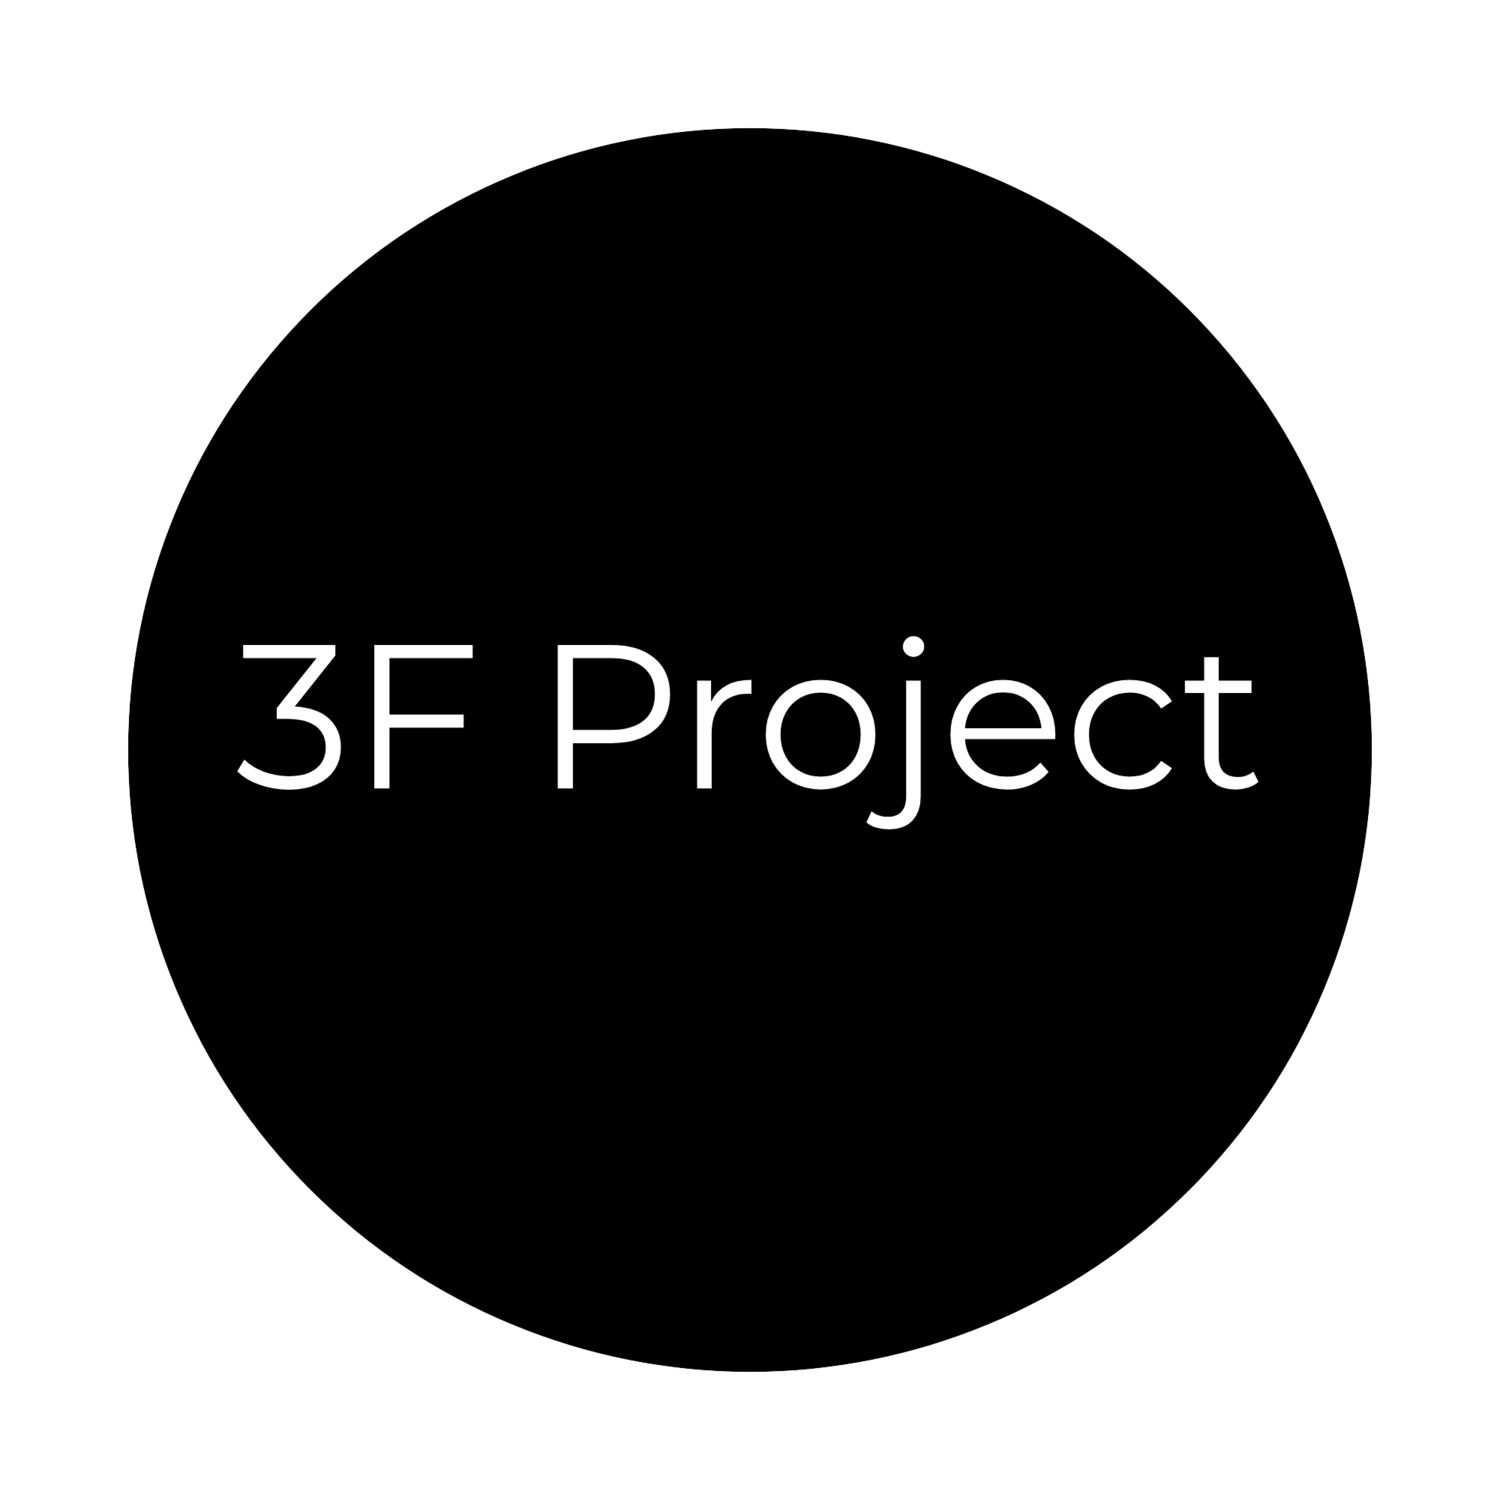 the 3F Project